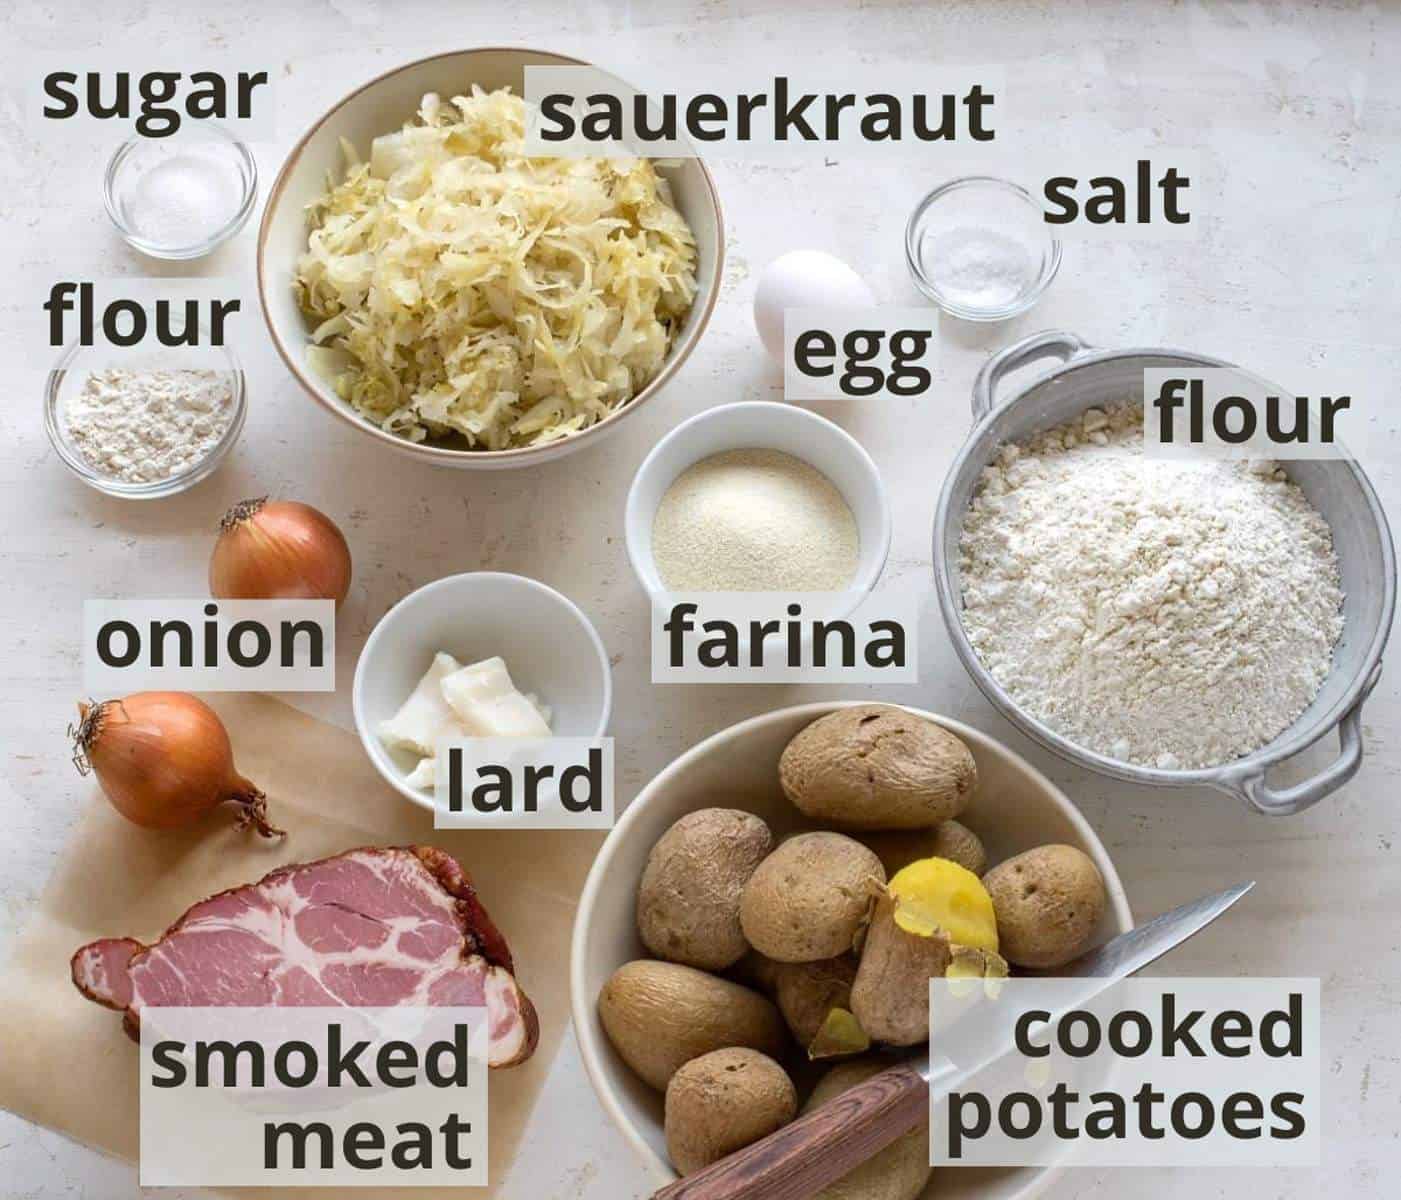 Ingredients for stuffed potatoes inclusive captions.